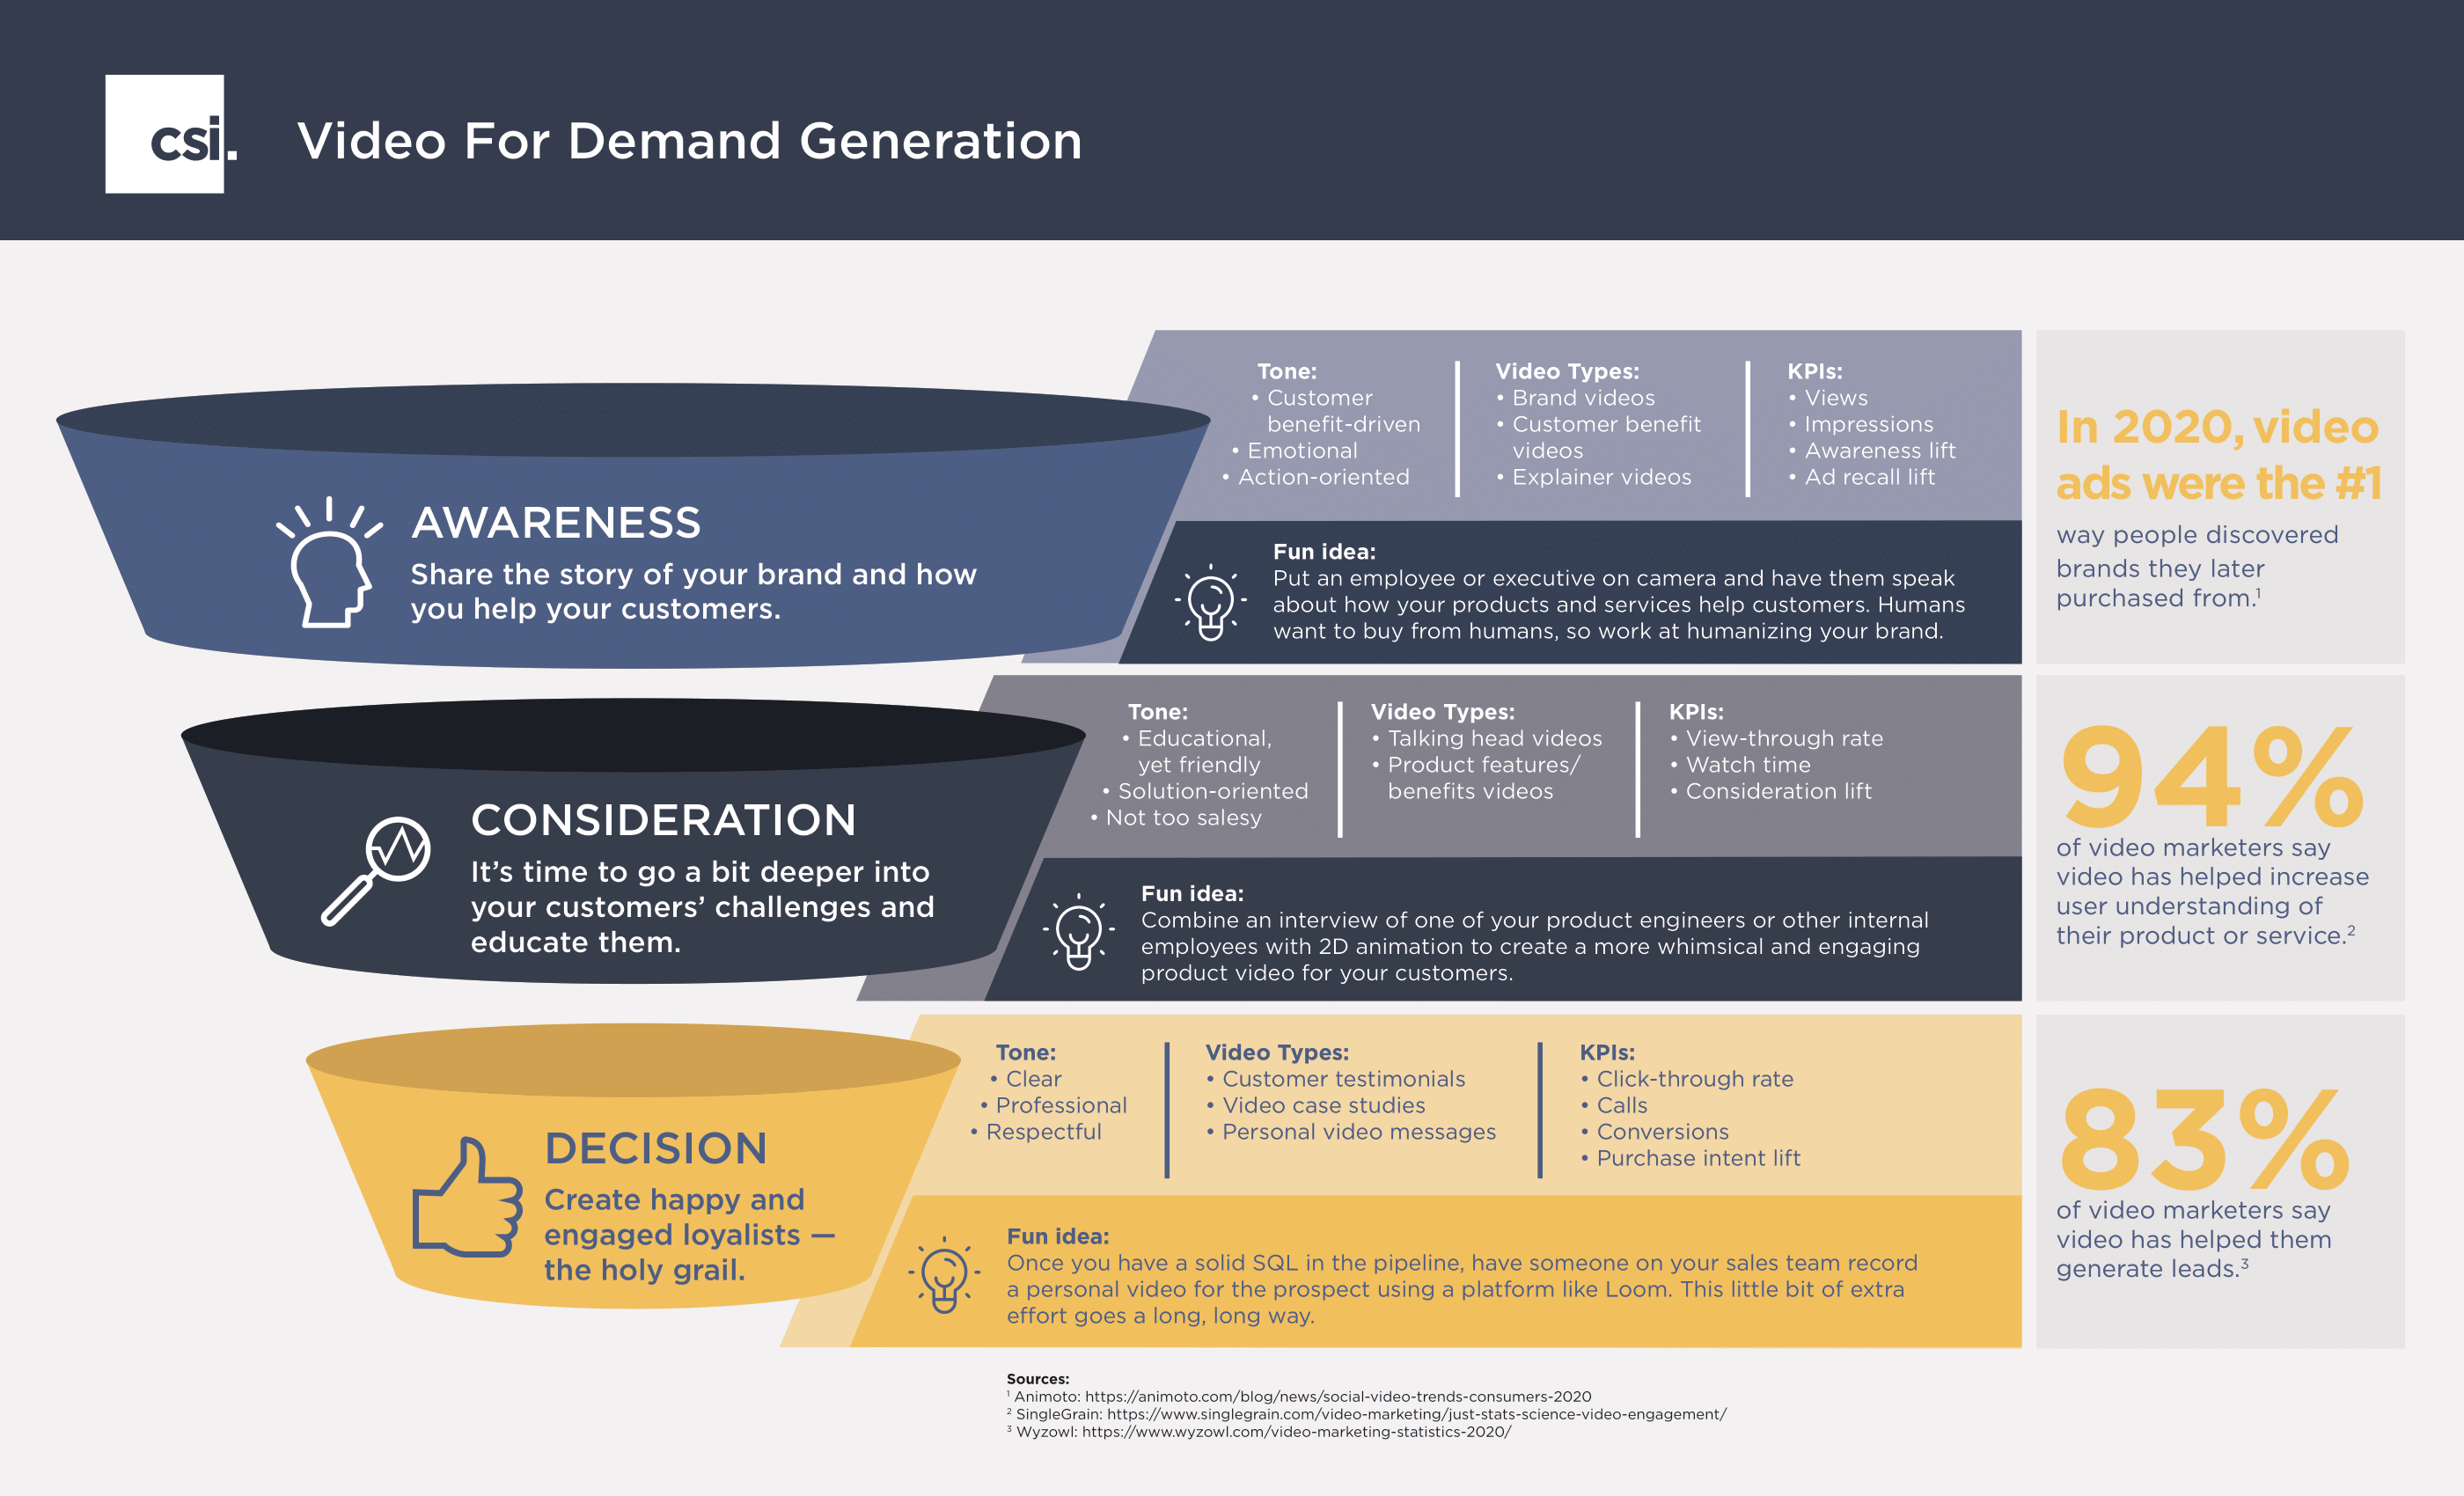 Video for Demand Generation (INFOGRAPHIC)